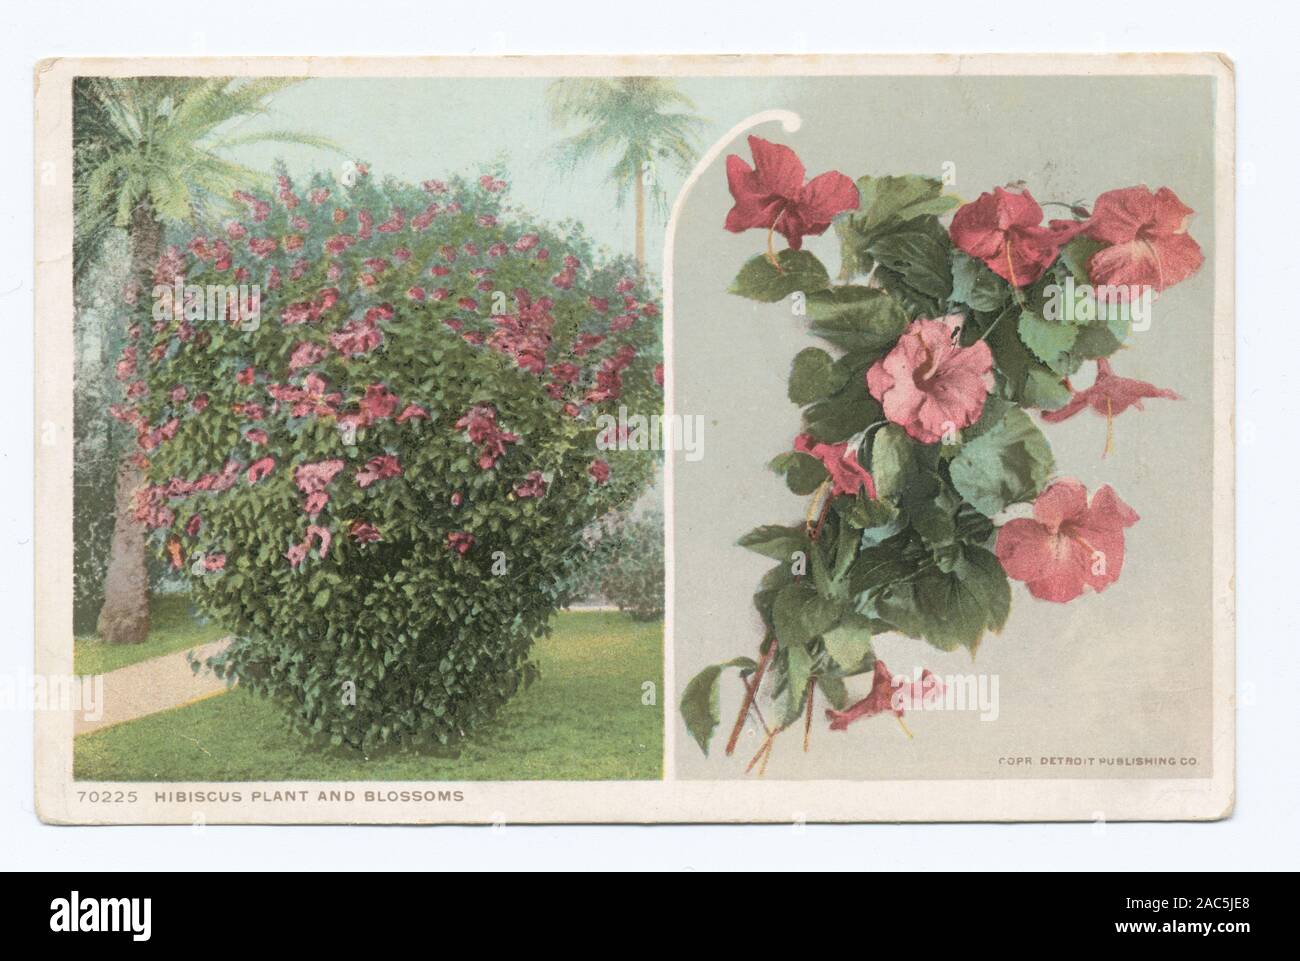 Hibiscus Plant and Bloosoms, Florida Continued the 14000 series. 70000 series issued with large gaps in numbering, may account for some unnumbered cardsHibiscus Plant and Bloosoms, Florida. Stock Photo